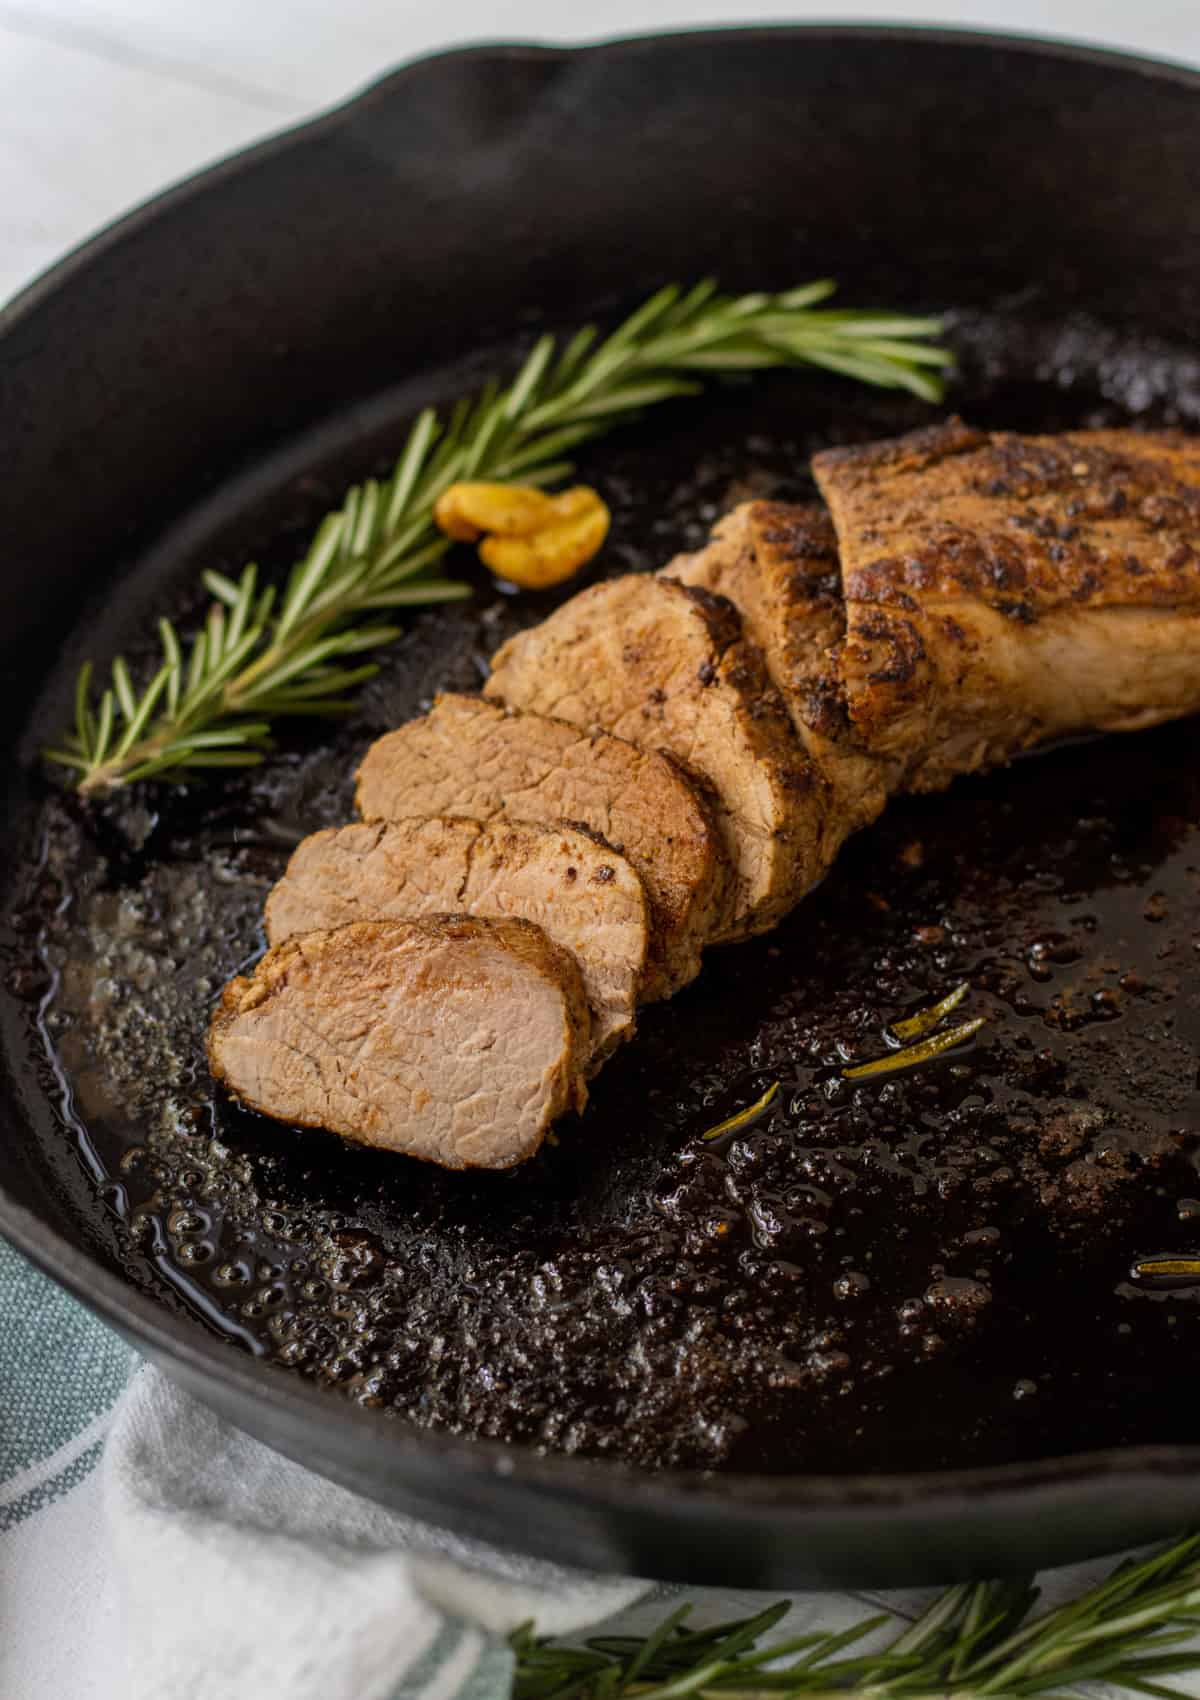 Sliced pork tenderloin in a cast iron skillet with rosemary and a garlic clove.